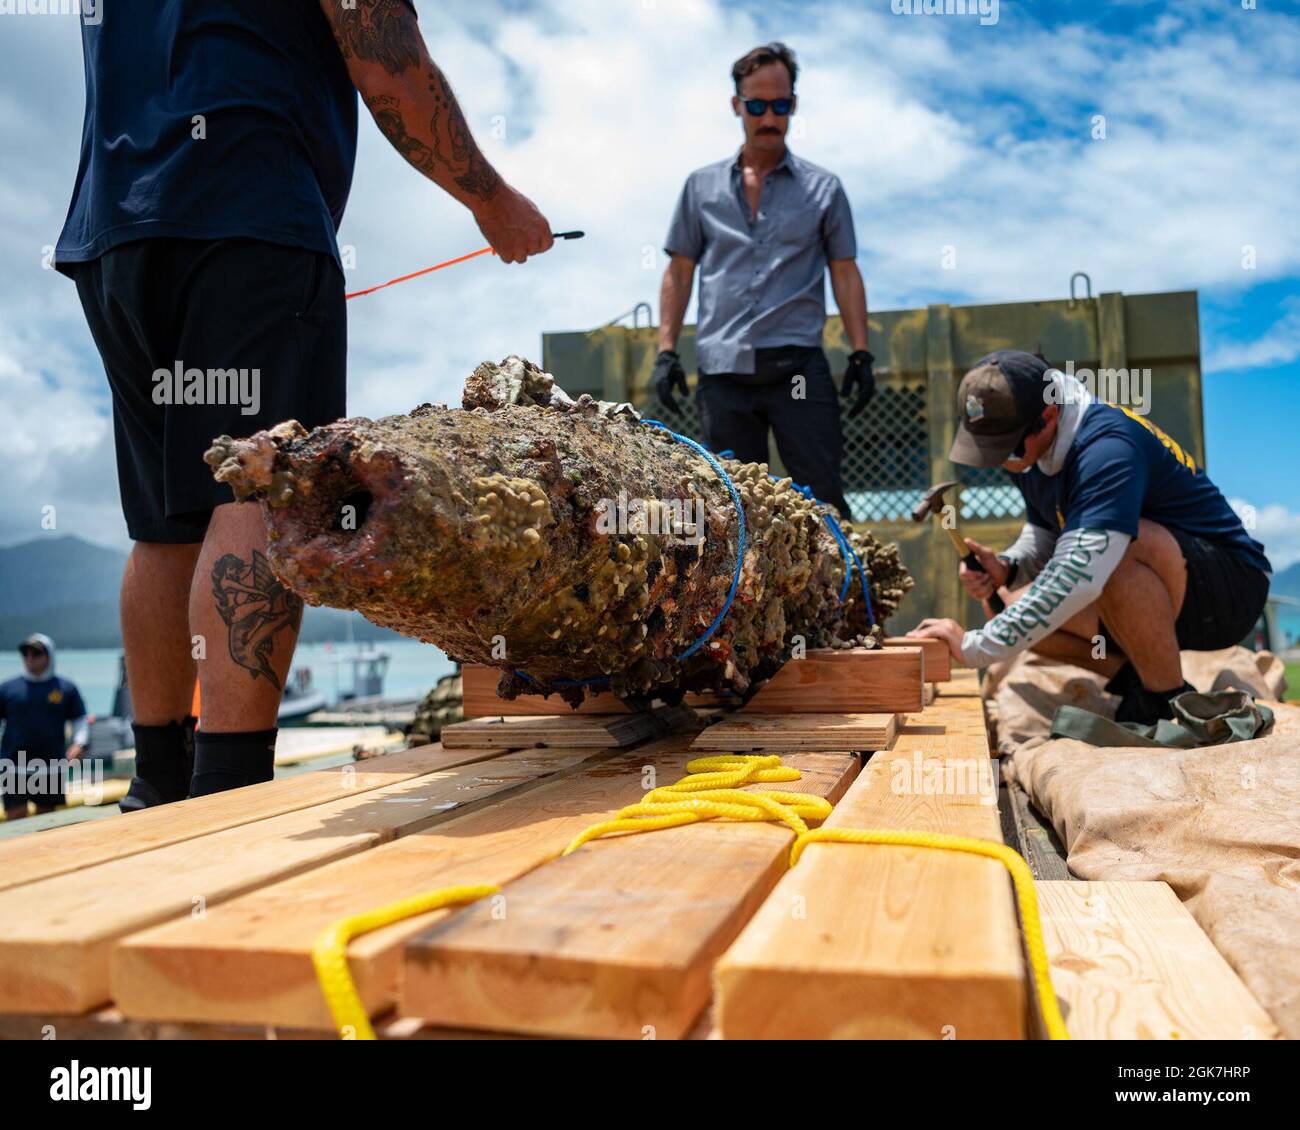 210826-N-OT701-1334 KANEOHE BAY, Hawaii Aug. 26, 2021 -- Sailors assigned to Mobile Diving and Salvage Unit ONE Detachment Explosive Ordnance Disposal Group (MDSU ONE DET EOD) secure an unexploded ordnance Stock Photo